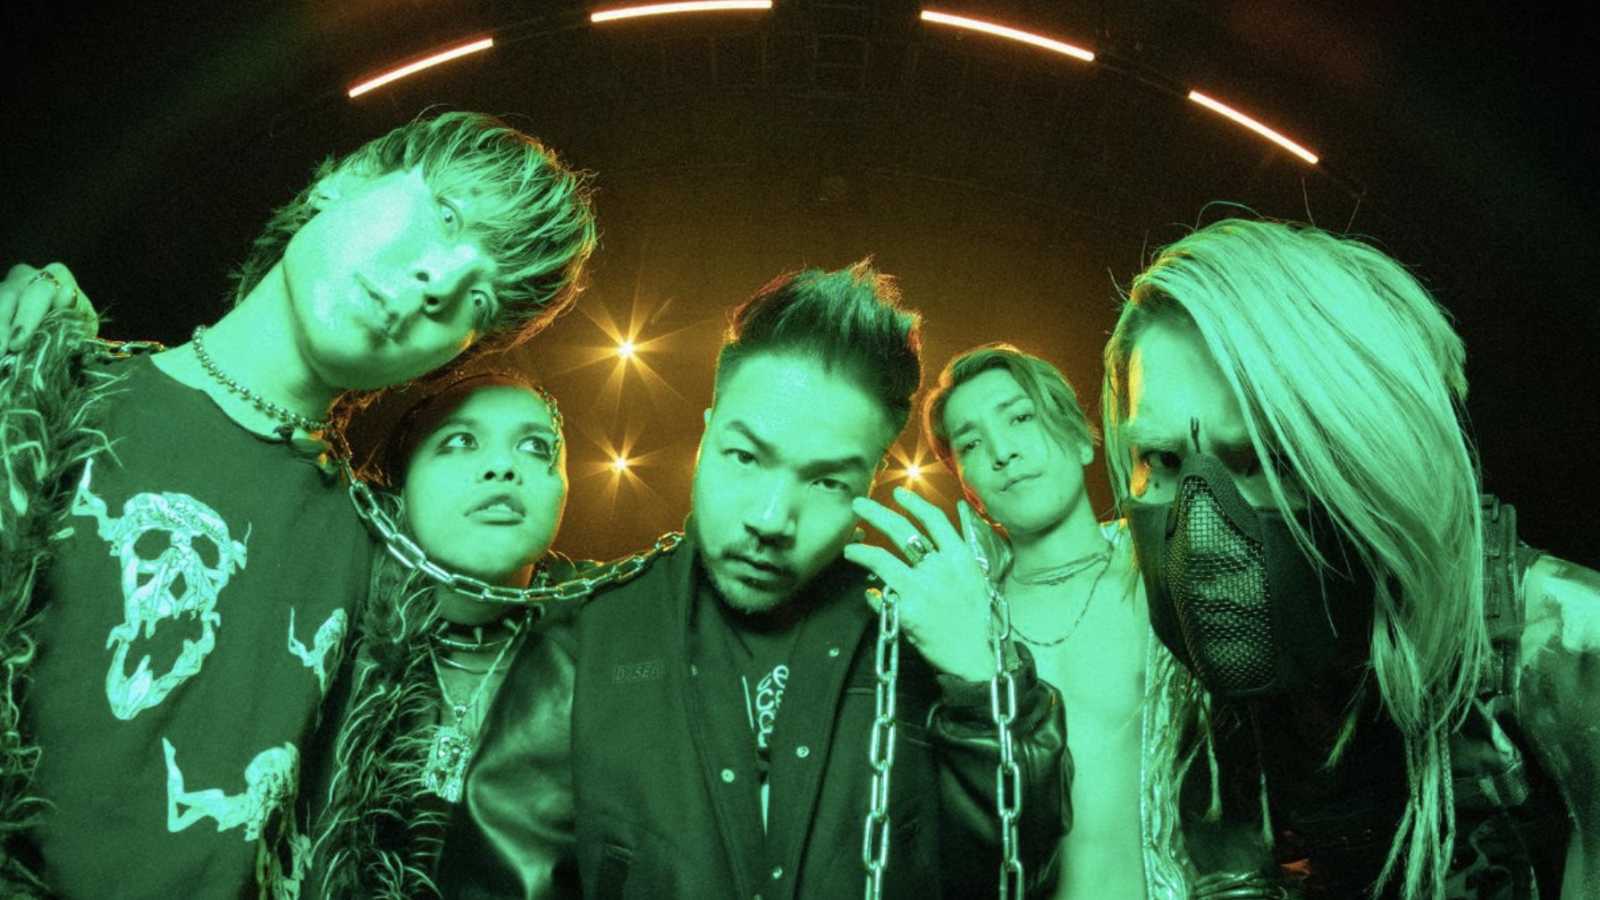 CROSSFAITH to Tour Europe © CROSSFAITH. All rights reserved.